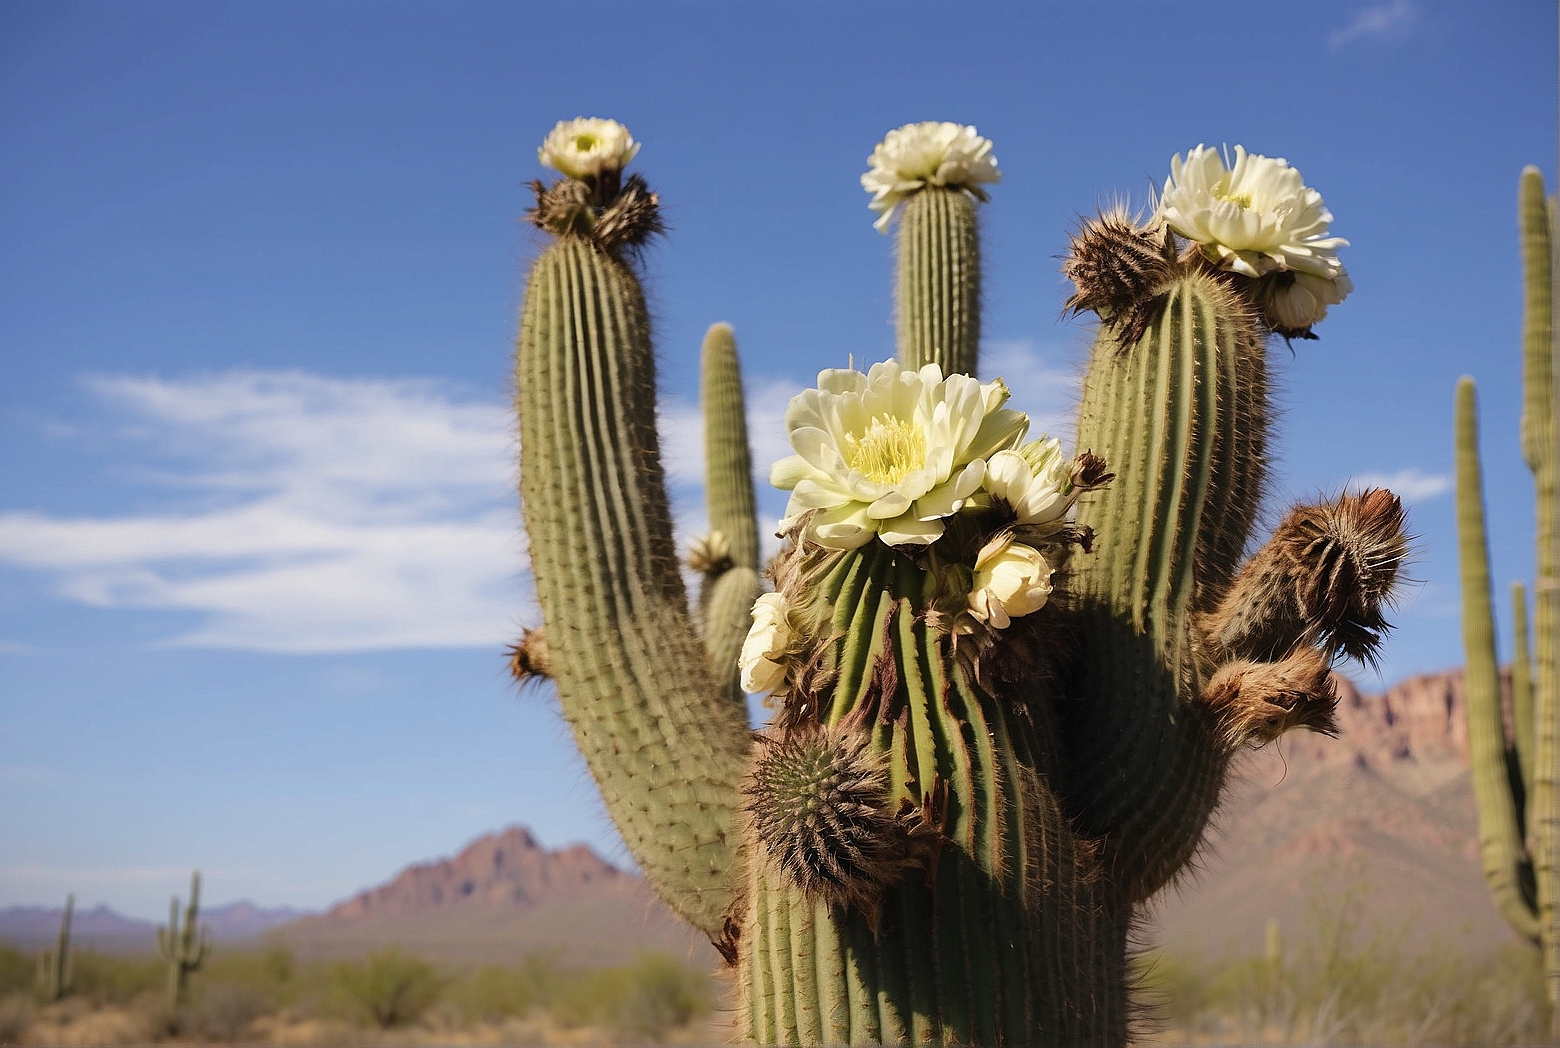 Methods for Determining the Age of a Saguaro Cactus